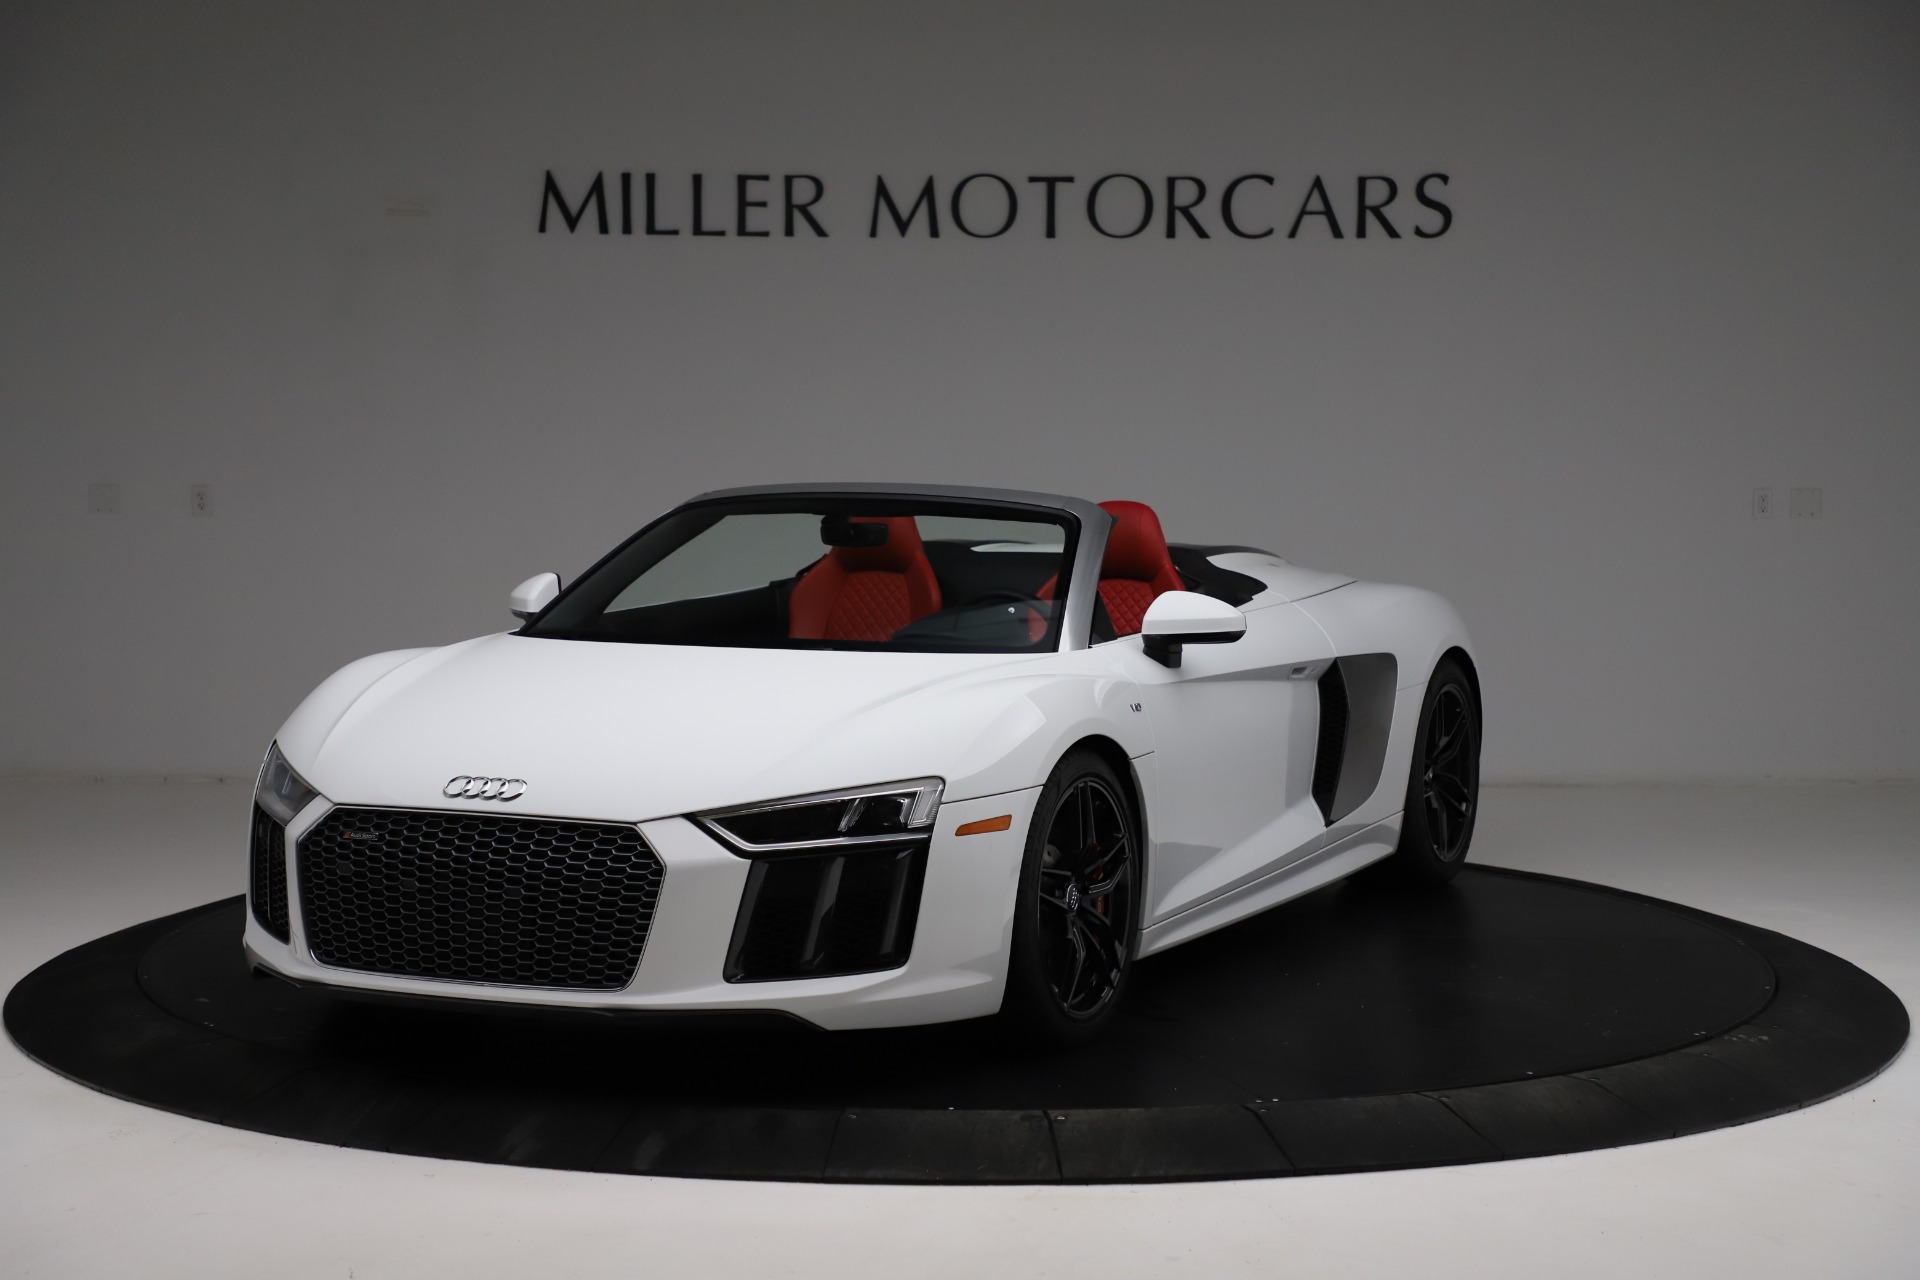 Used 2018 Audi R8 Spyder for sale Sold at Bugatti of Greenwich in Greenwich CT 06830 1